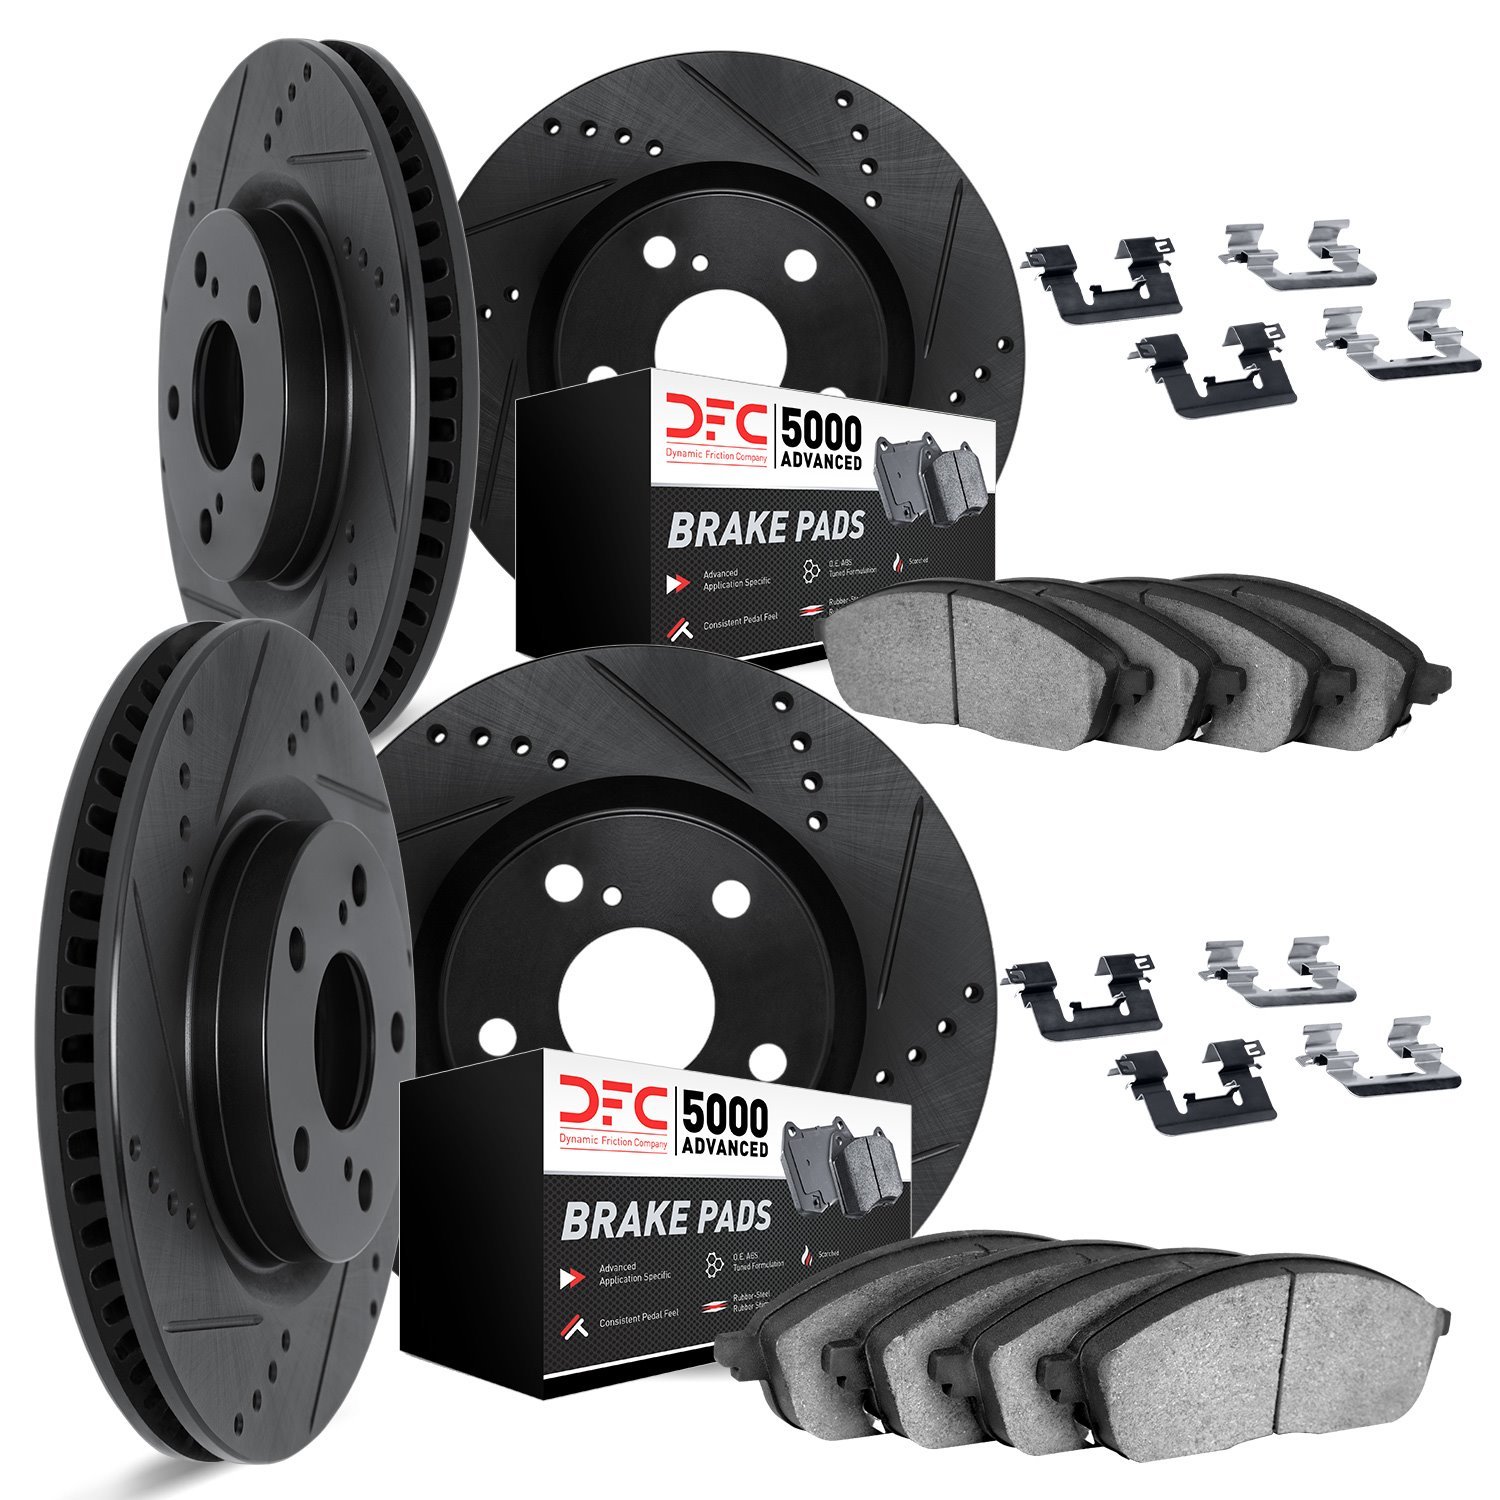 8514-13020 Drilled/Slotted Brake Rotors w/5000 Advanced Brake Pads Kit & Hardware [Black], Fits Select Subaru, Position: Front a